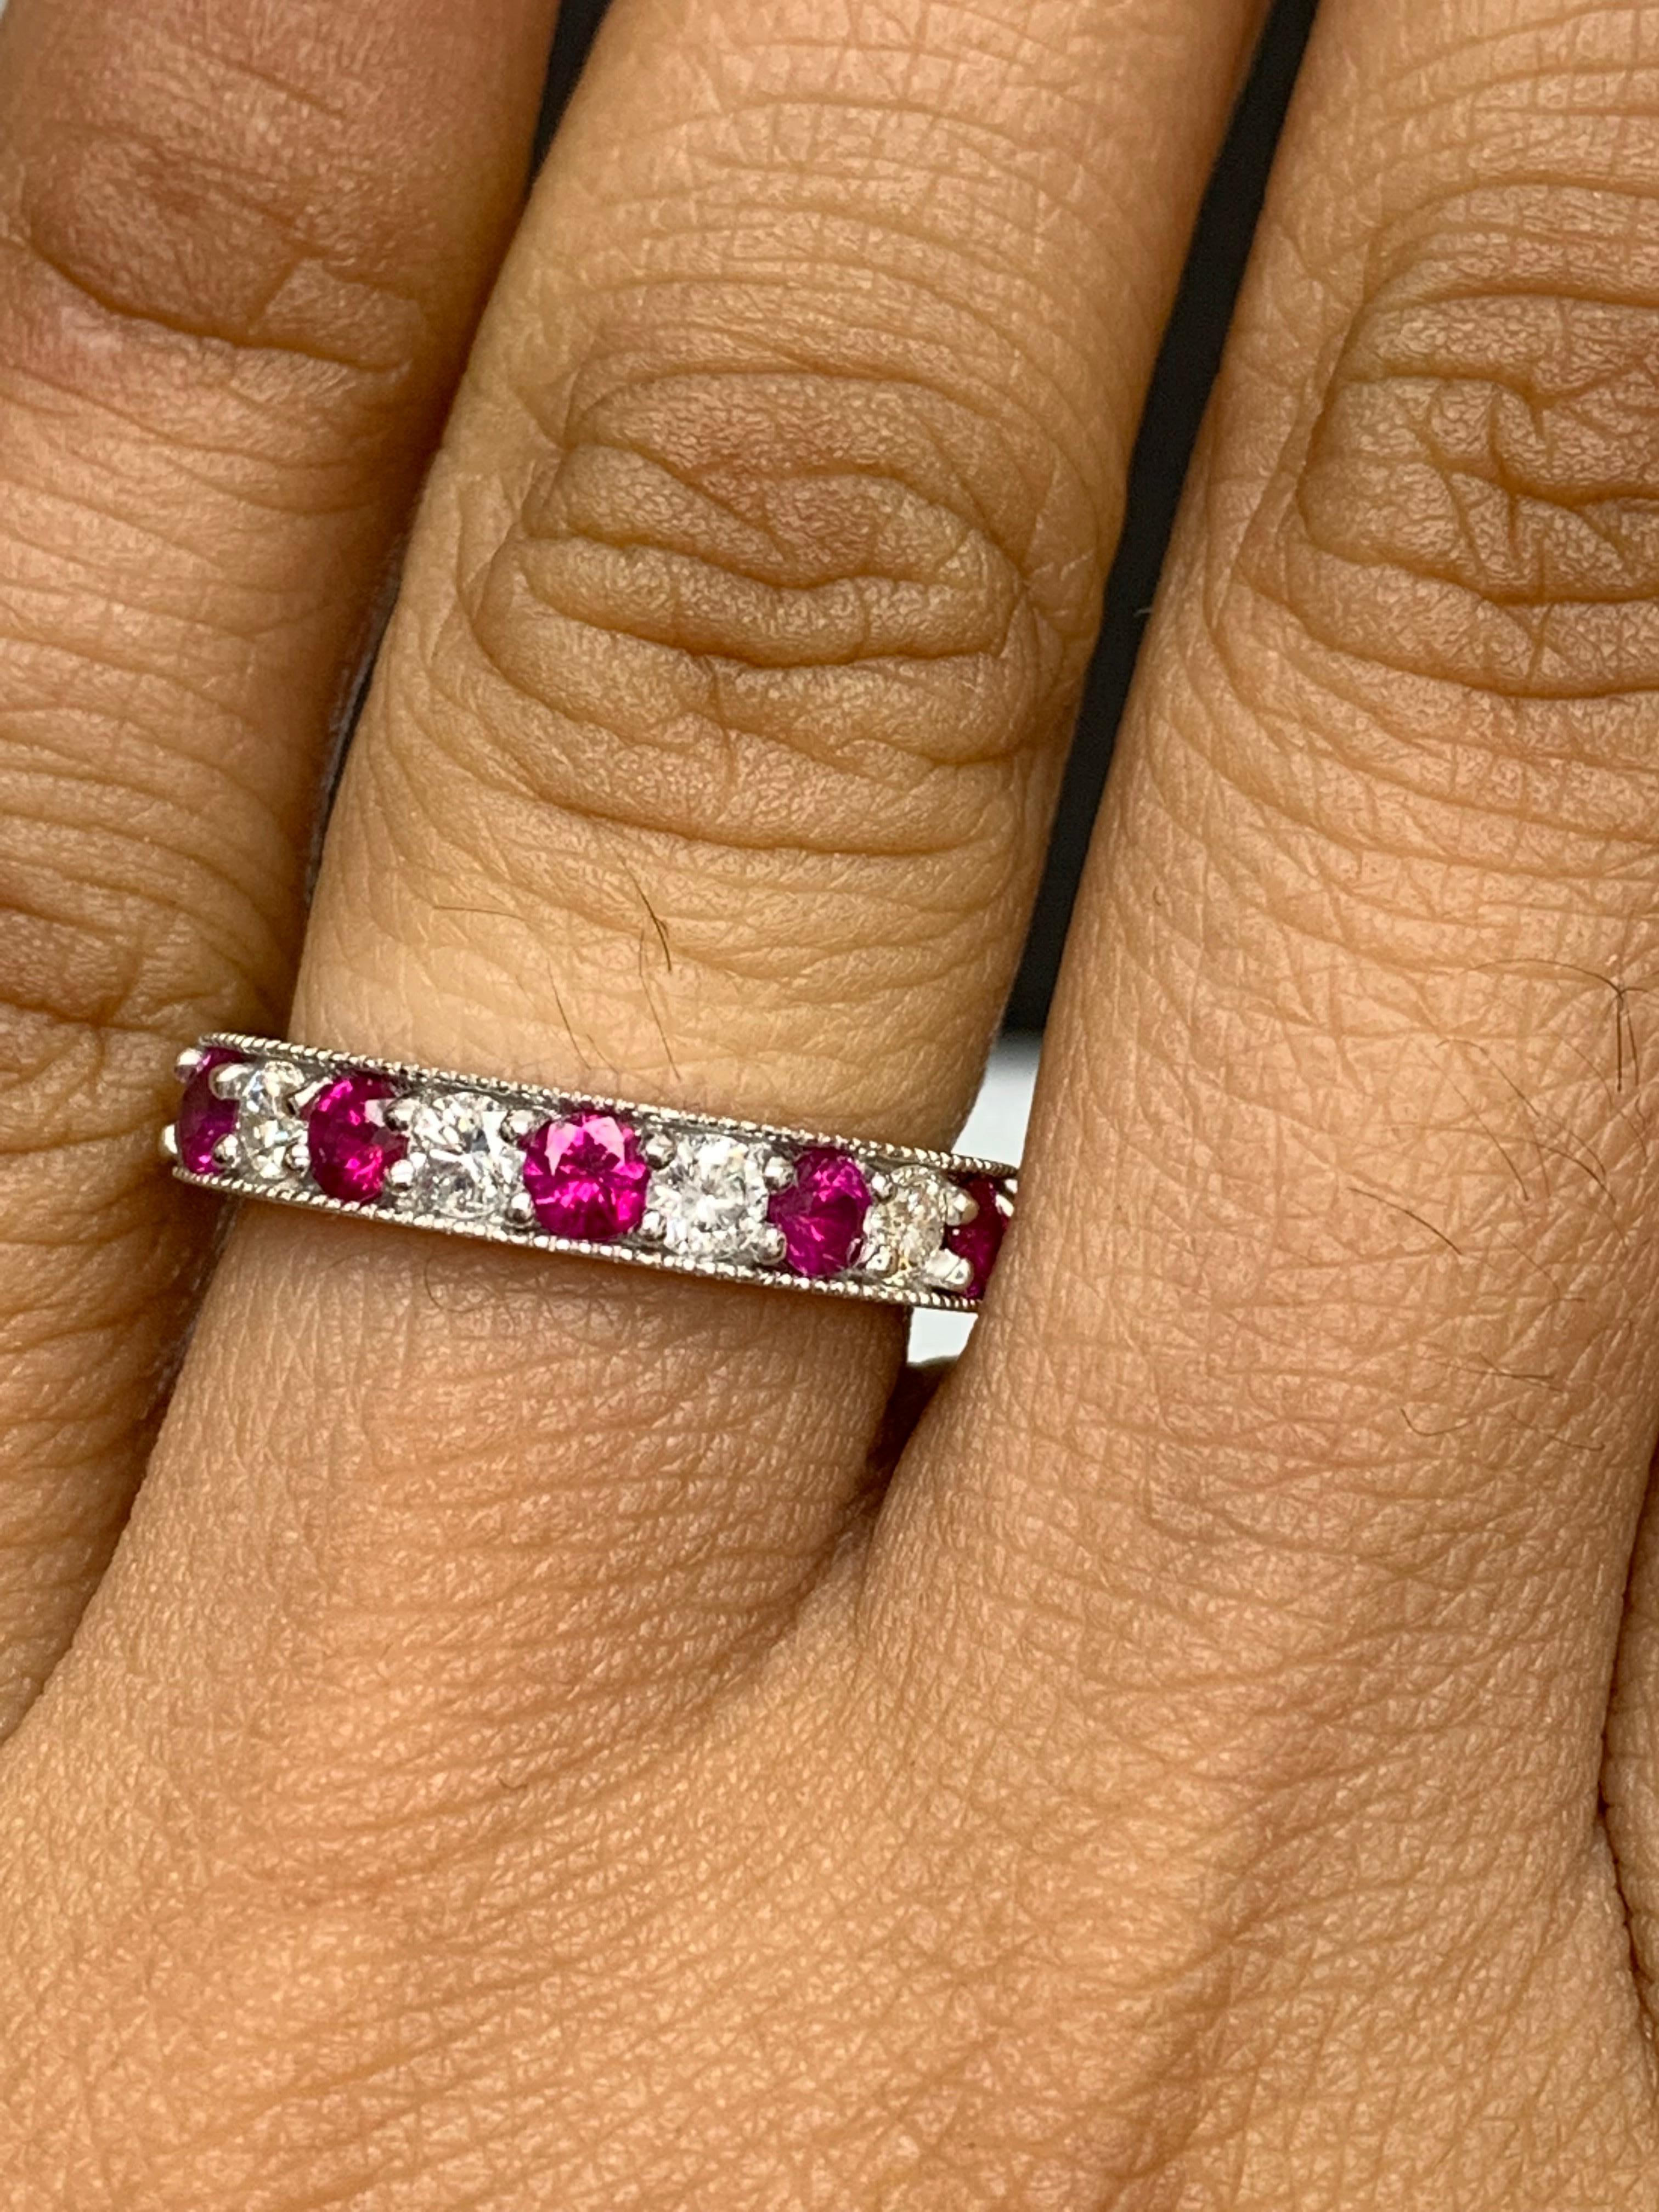 Handcrafted to perfection; showcasing color-rich brilliant-cut rubies that elegantly alternate brilliant-cut diamonds in a 14k white gold setting. 
The 6 Rubies weigh 0.82 carats total and 5 diamonds weigh 0.50 carats total.

Size 6.5 US (Sizable).